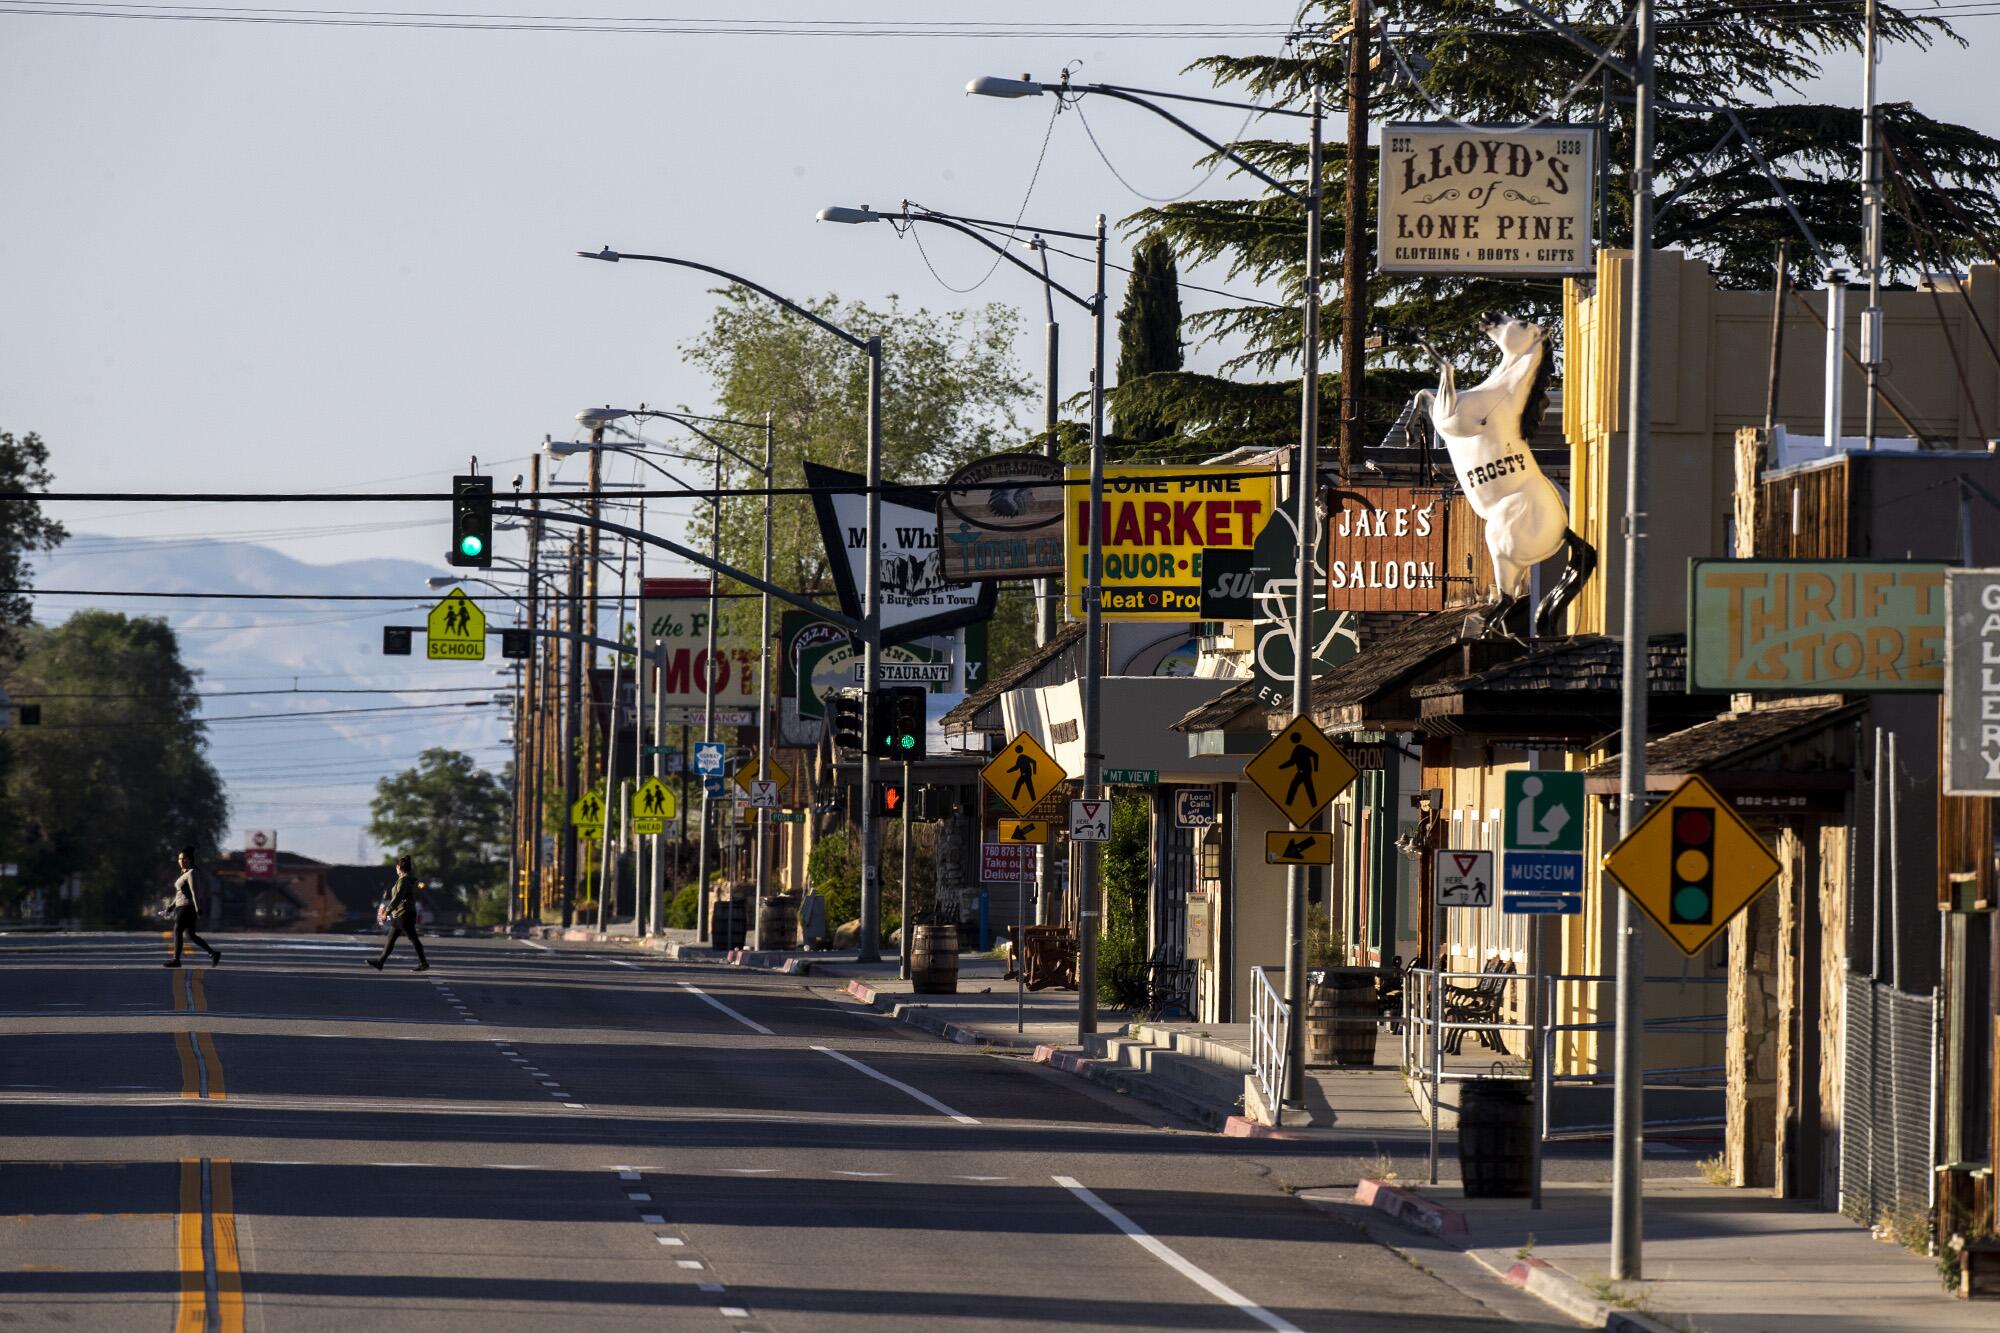 Business is slow on Main Street in Lone Pine, Calif.